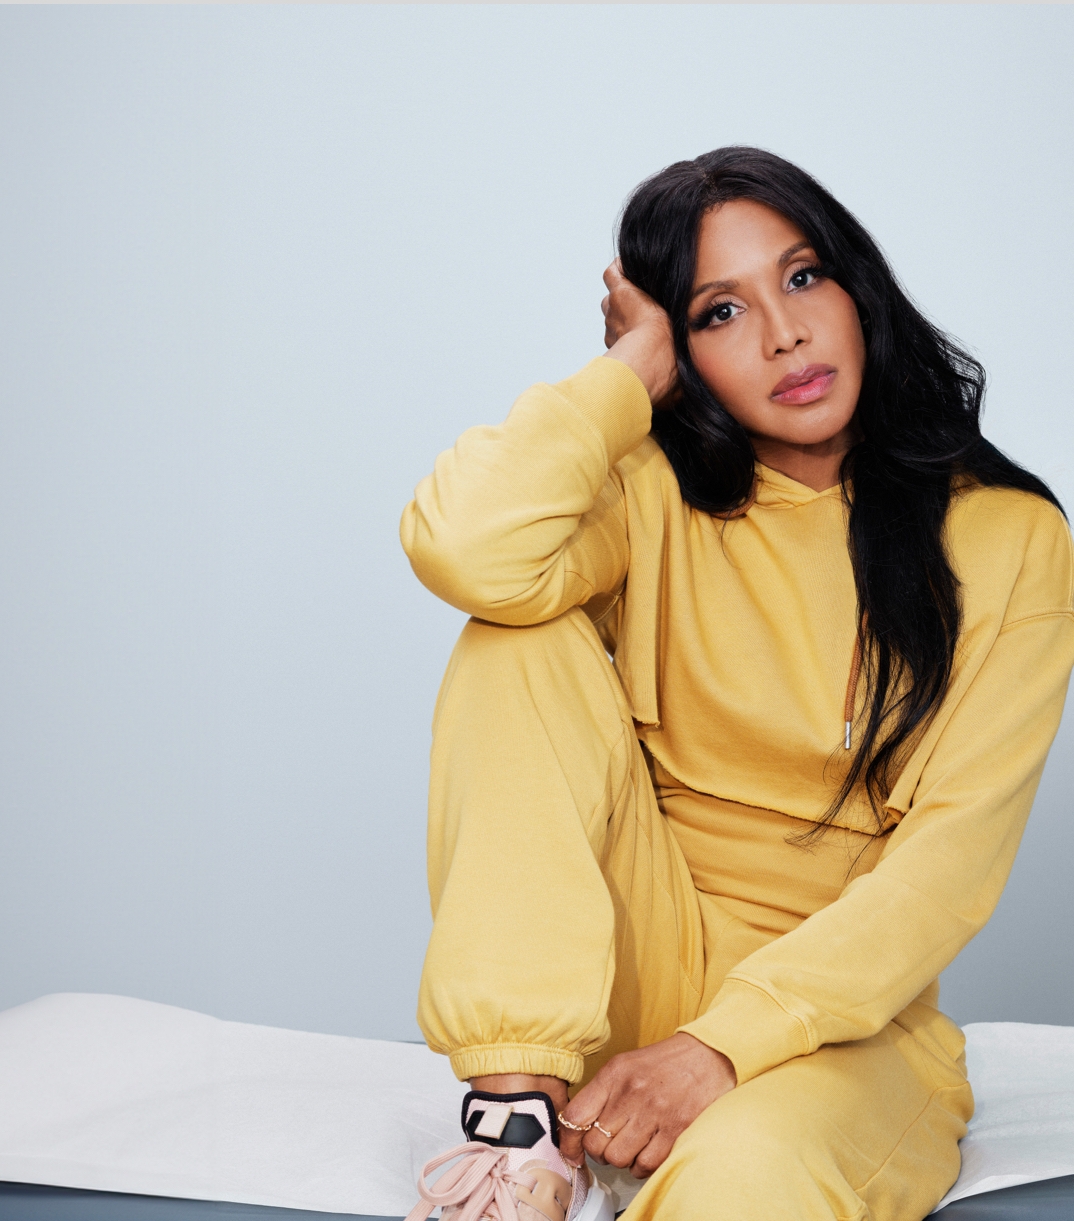 Image of Toni Braxton, who has been living with lupus since 2008